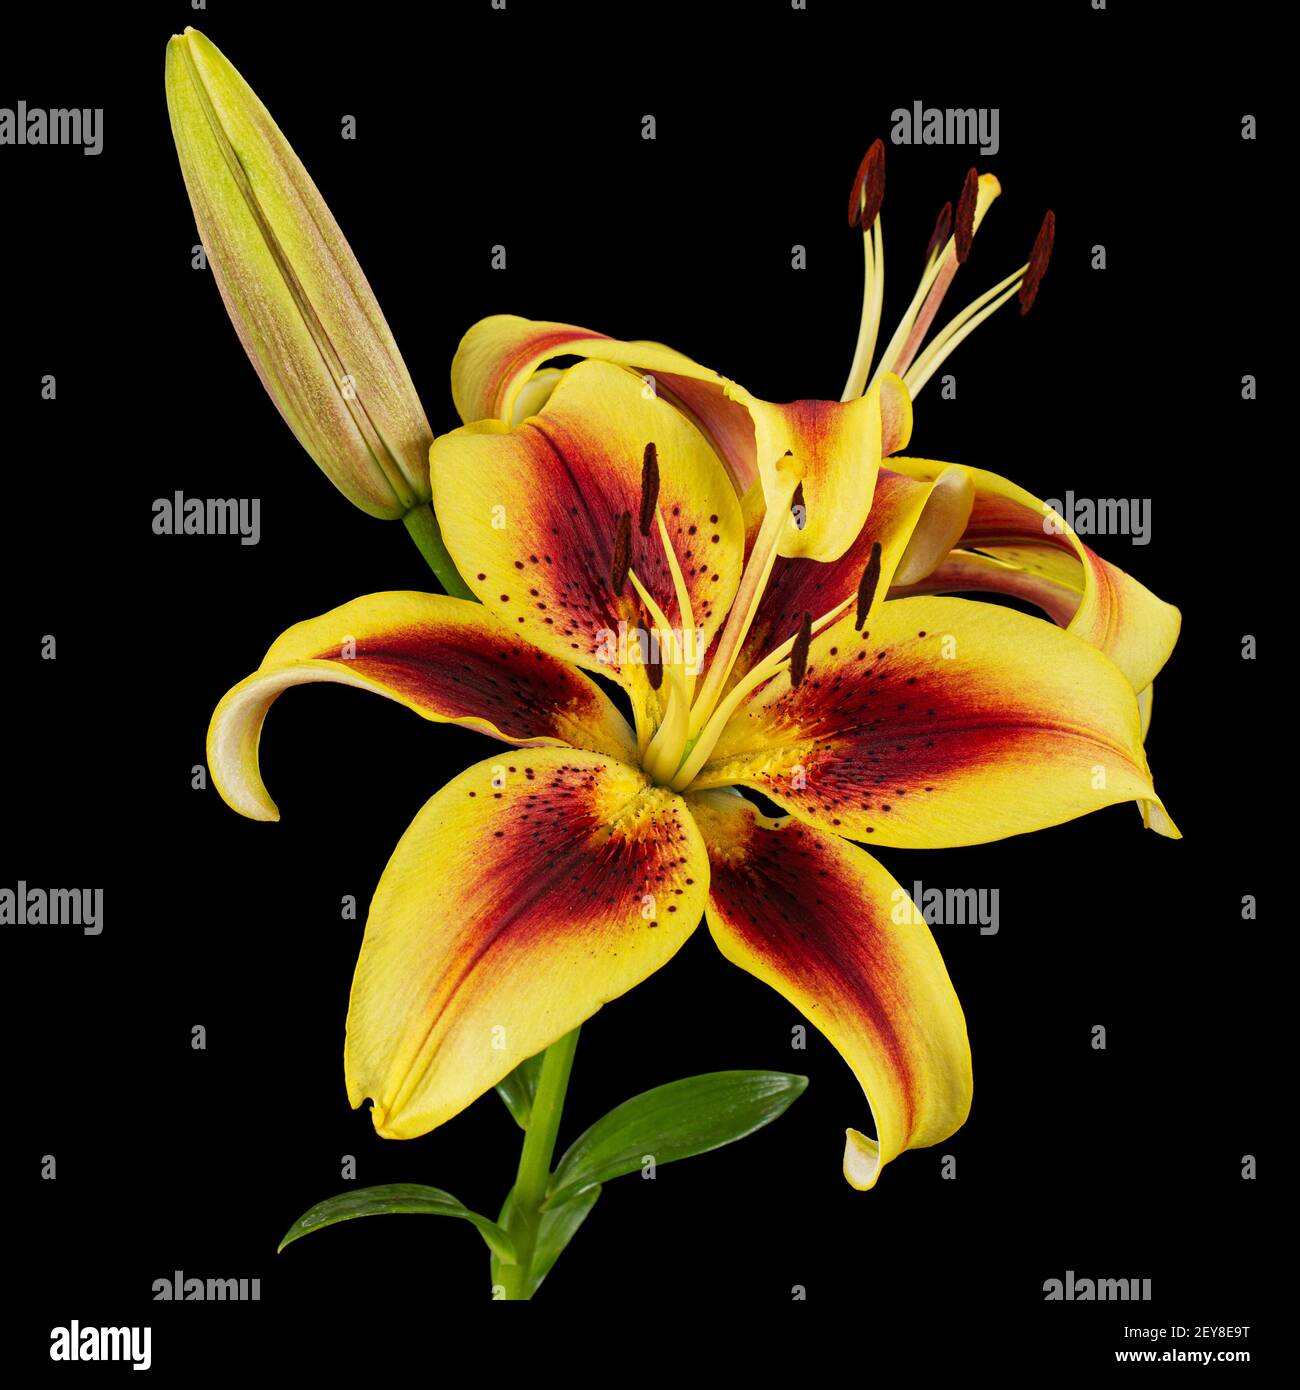 Yellow-burgundy flower of lily, isolated on black background Stock Photo